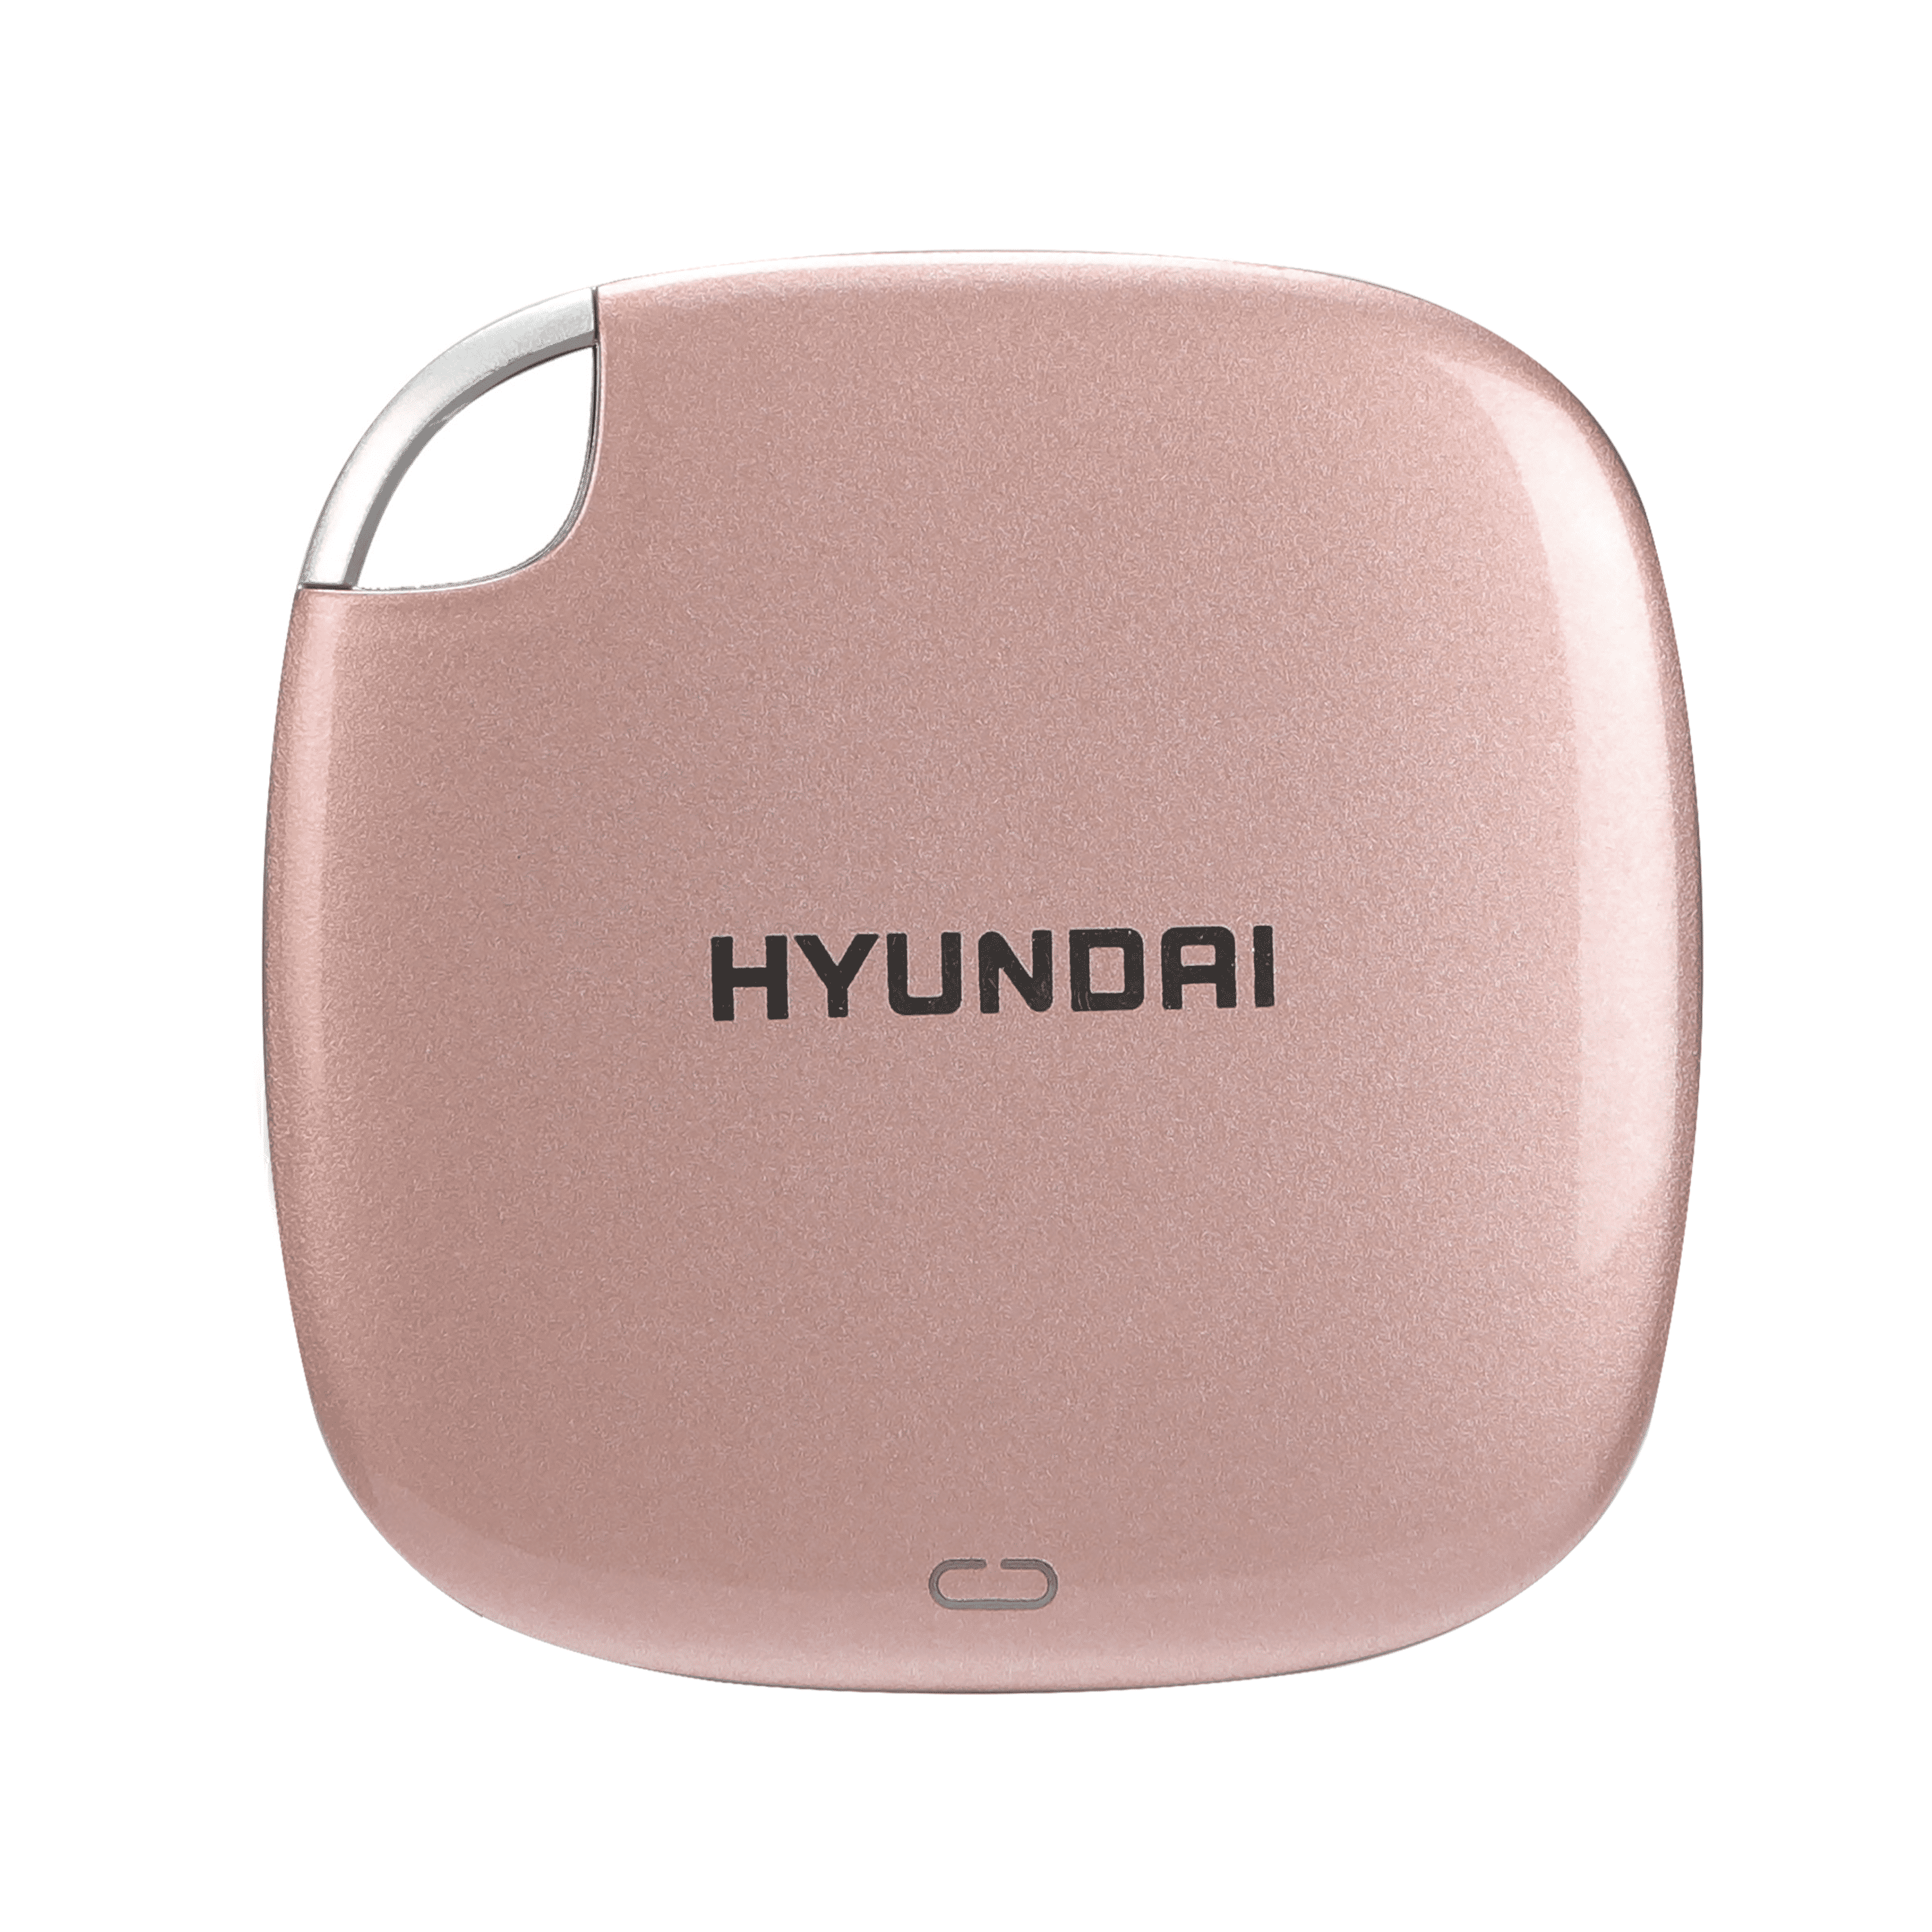 Abuse Compatible with peaceful Hyundai 512GB Ultra Portable Data Storage Fast External SSD, PC/MAC/Mobile-  USB-C/USB-A, Dual Cable Included, Rose Gold - HTESD500RG - Walmart.com